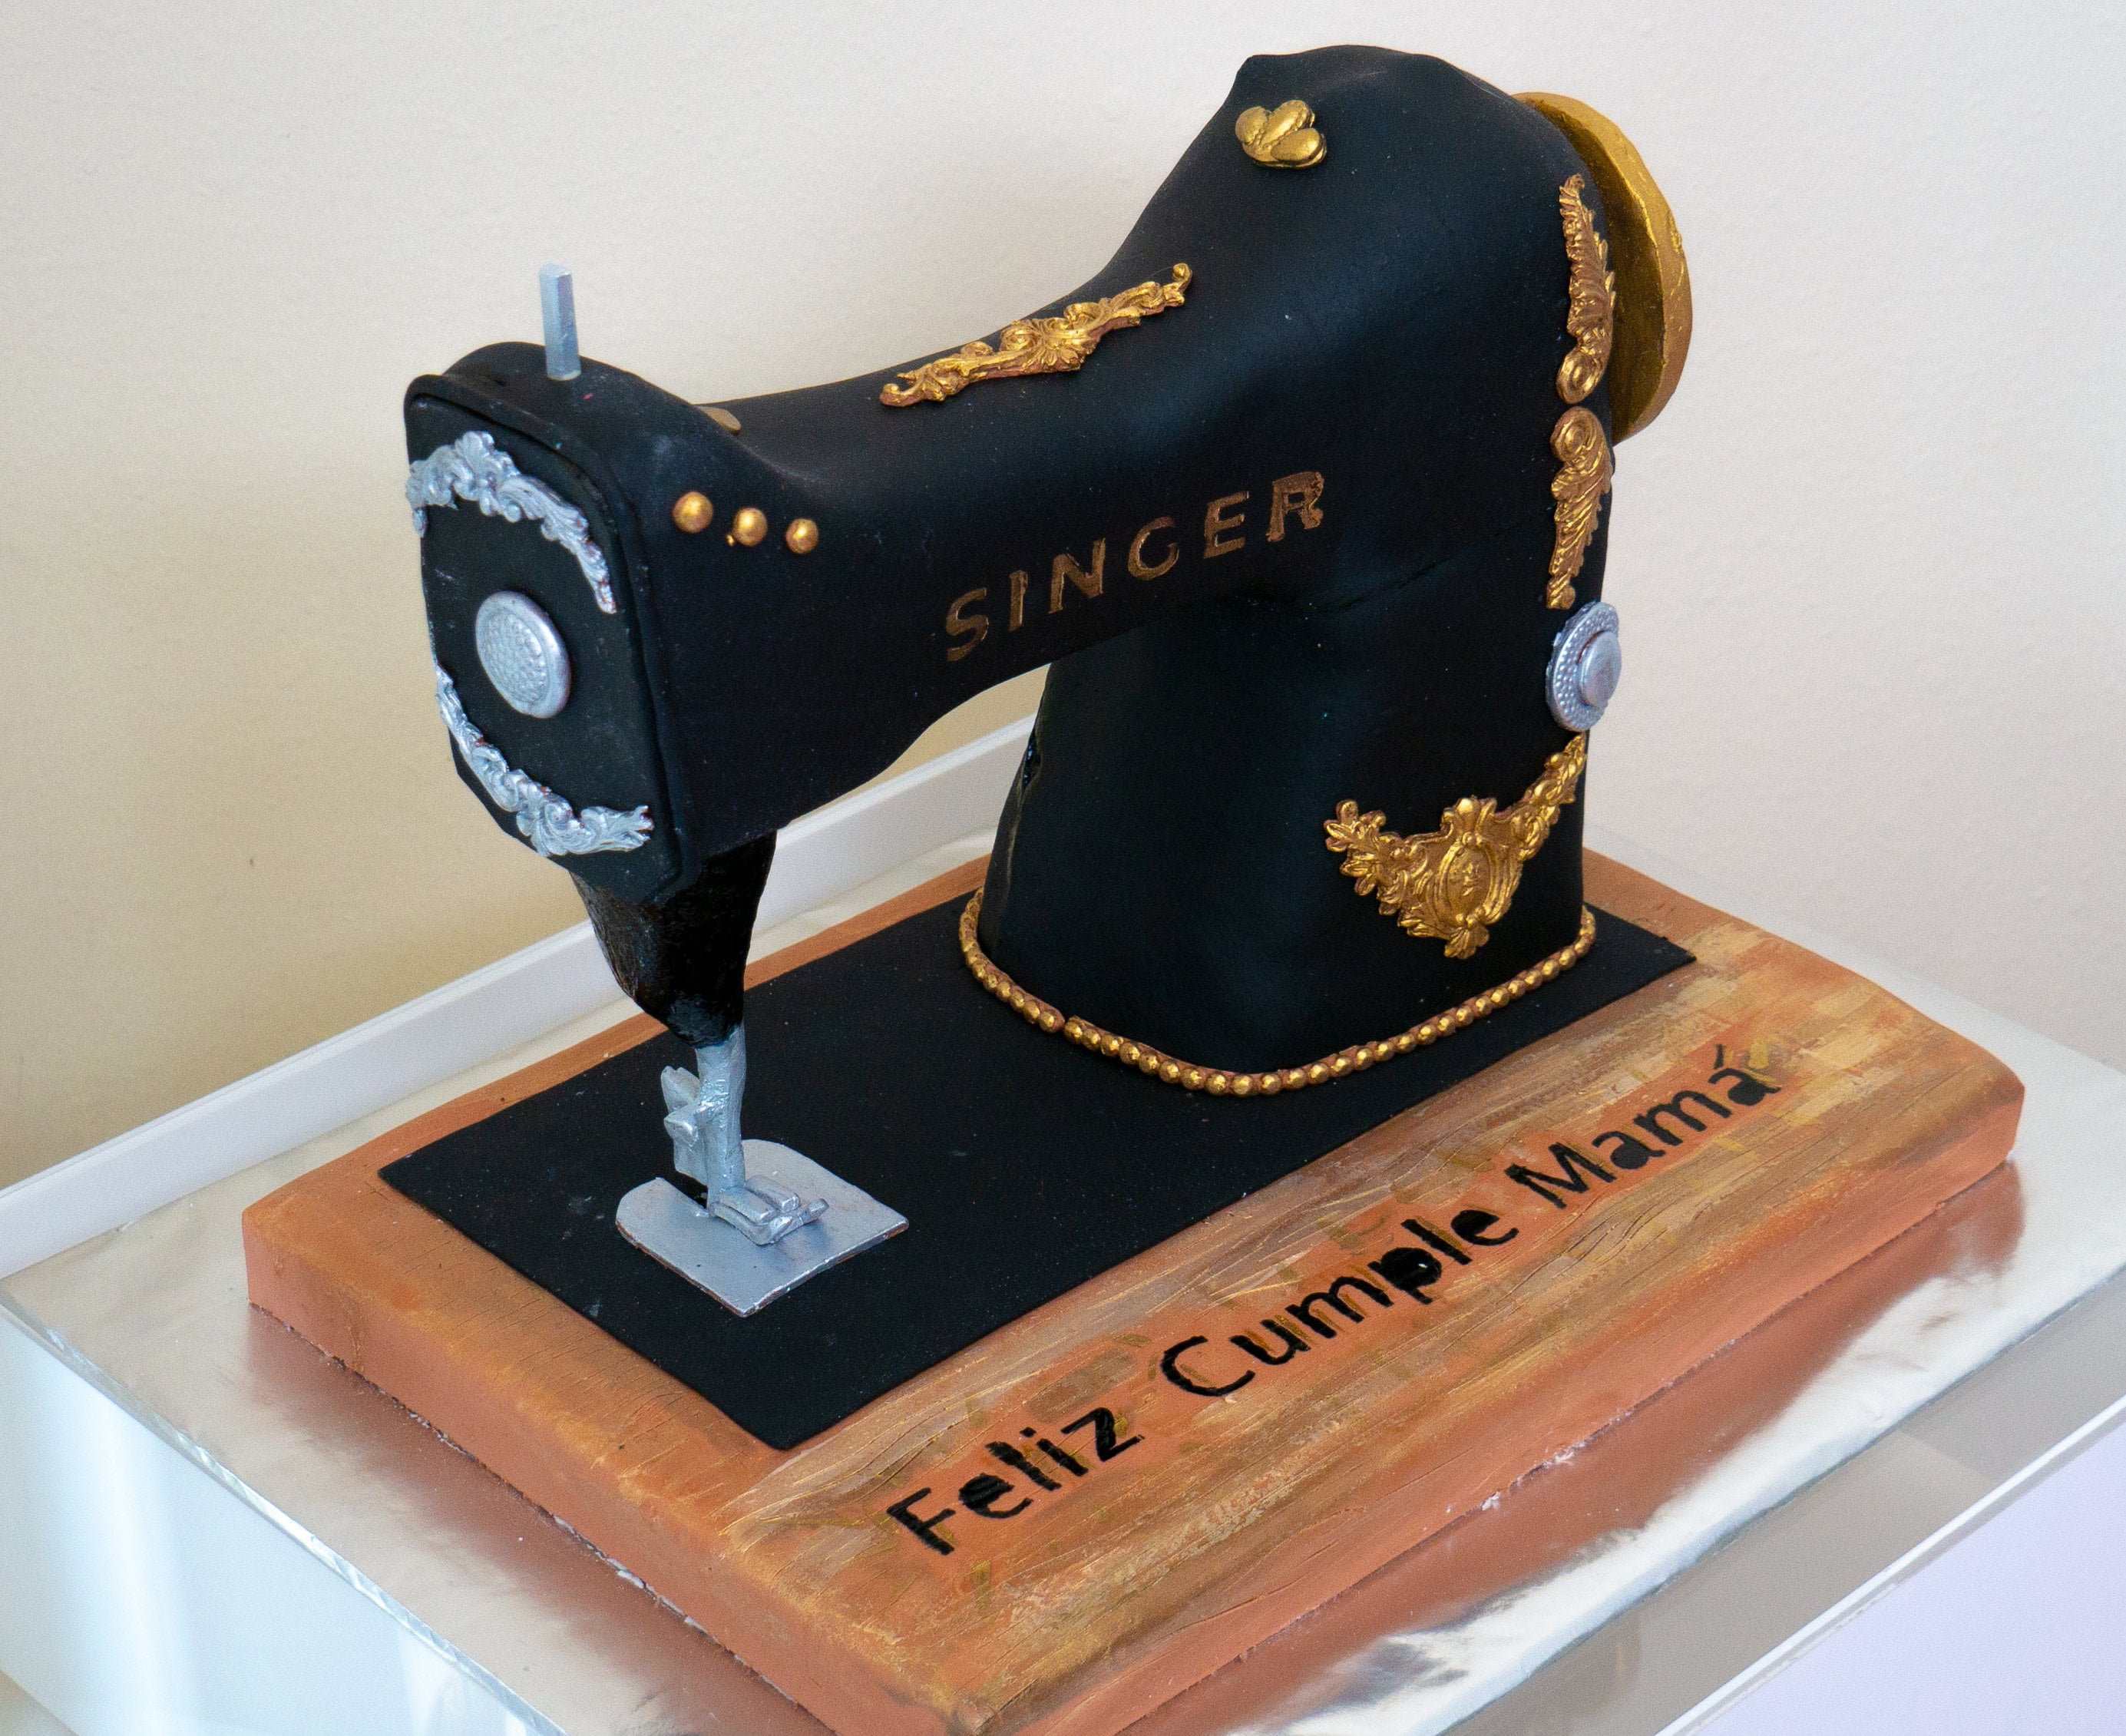 Singer Sewing Machine Cake-id#376983- by Budget101.com